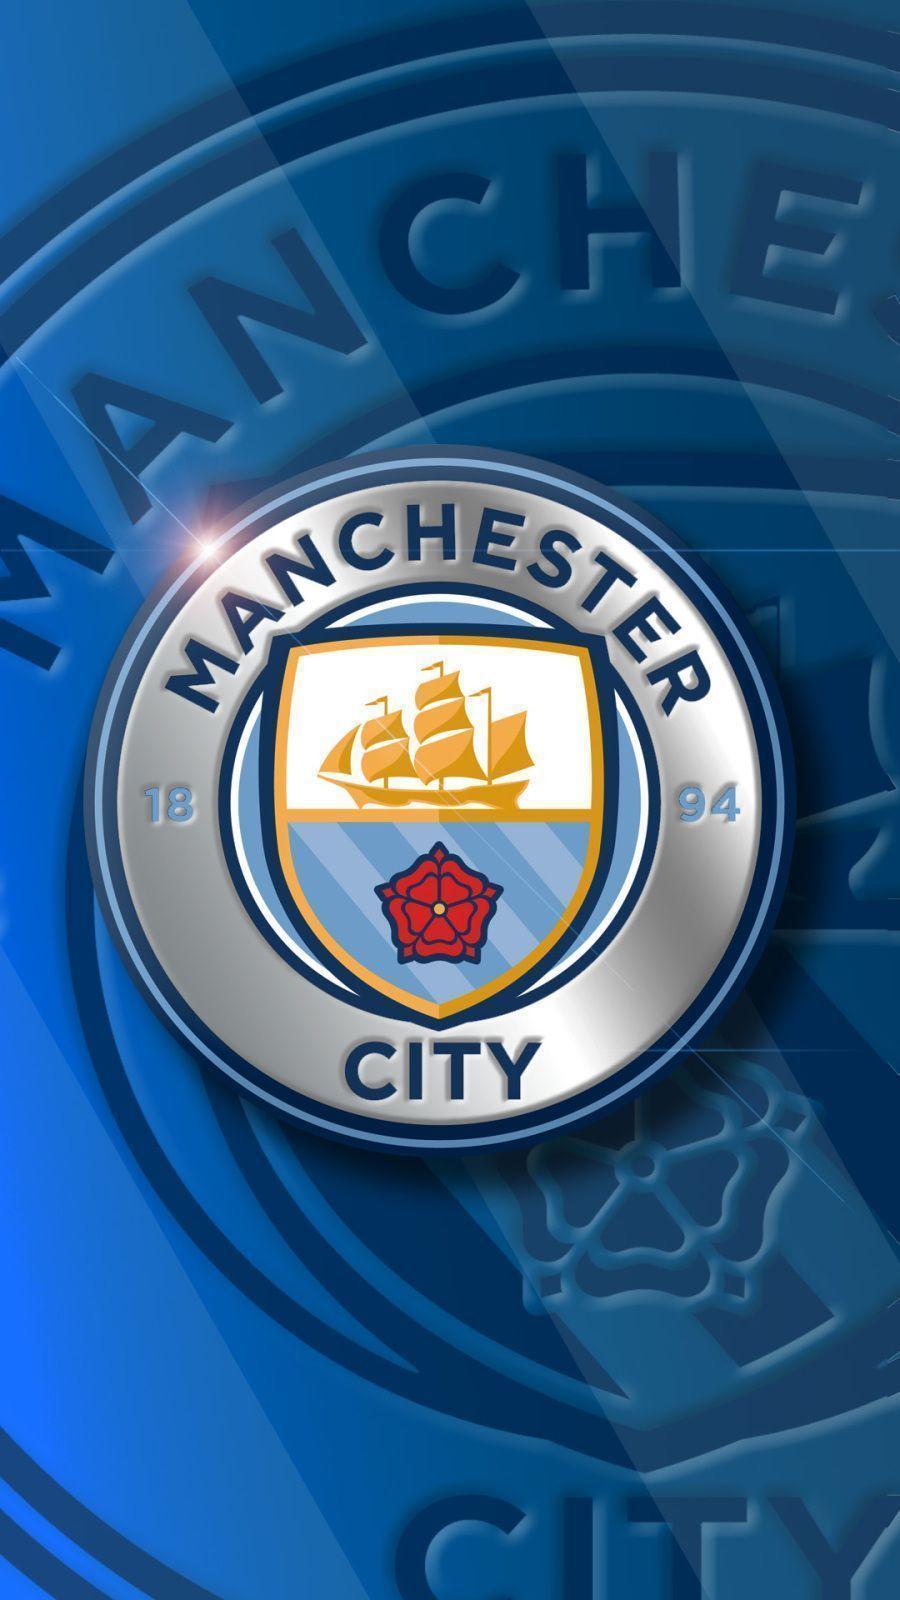 Mcfc Badge 2016 Related Keywords & Suggestions Badge 2016